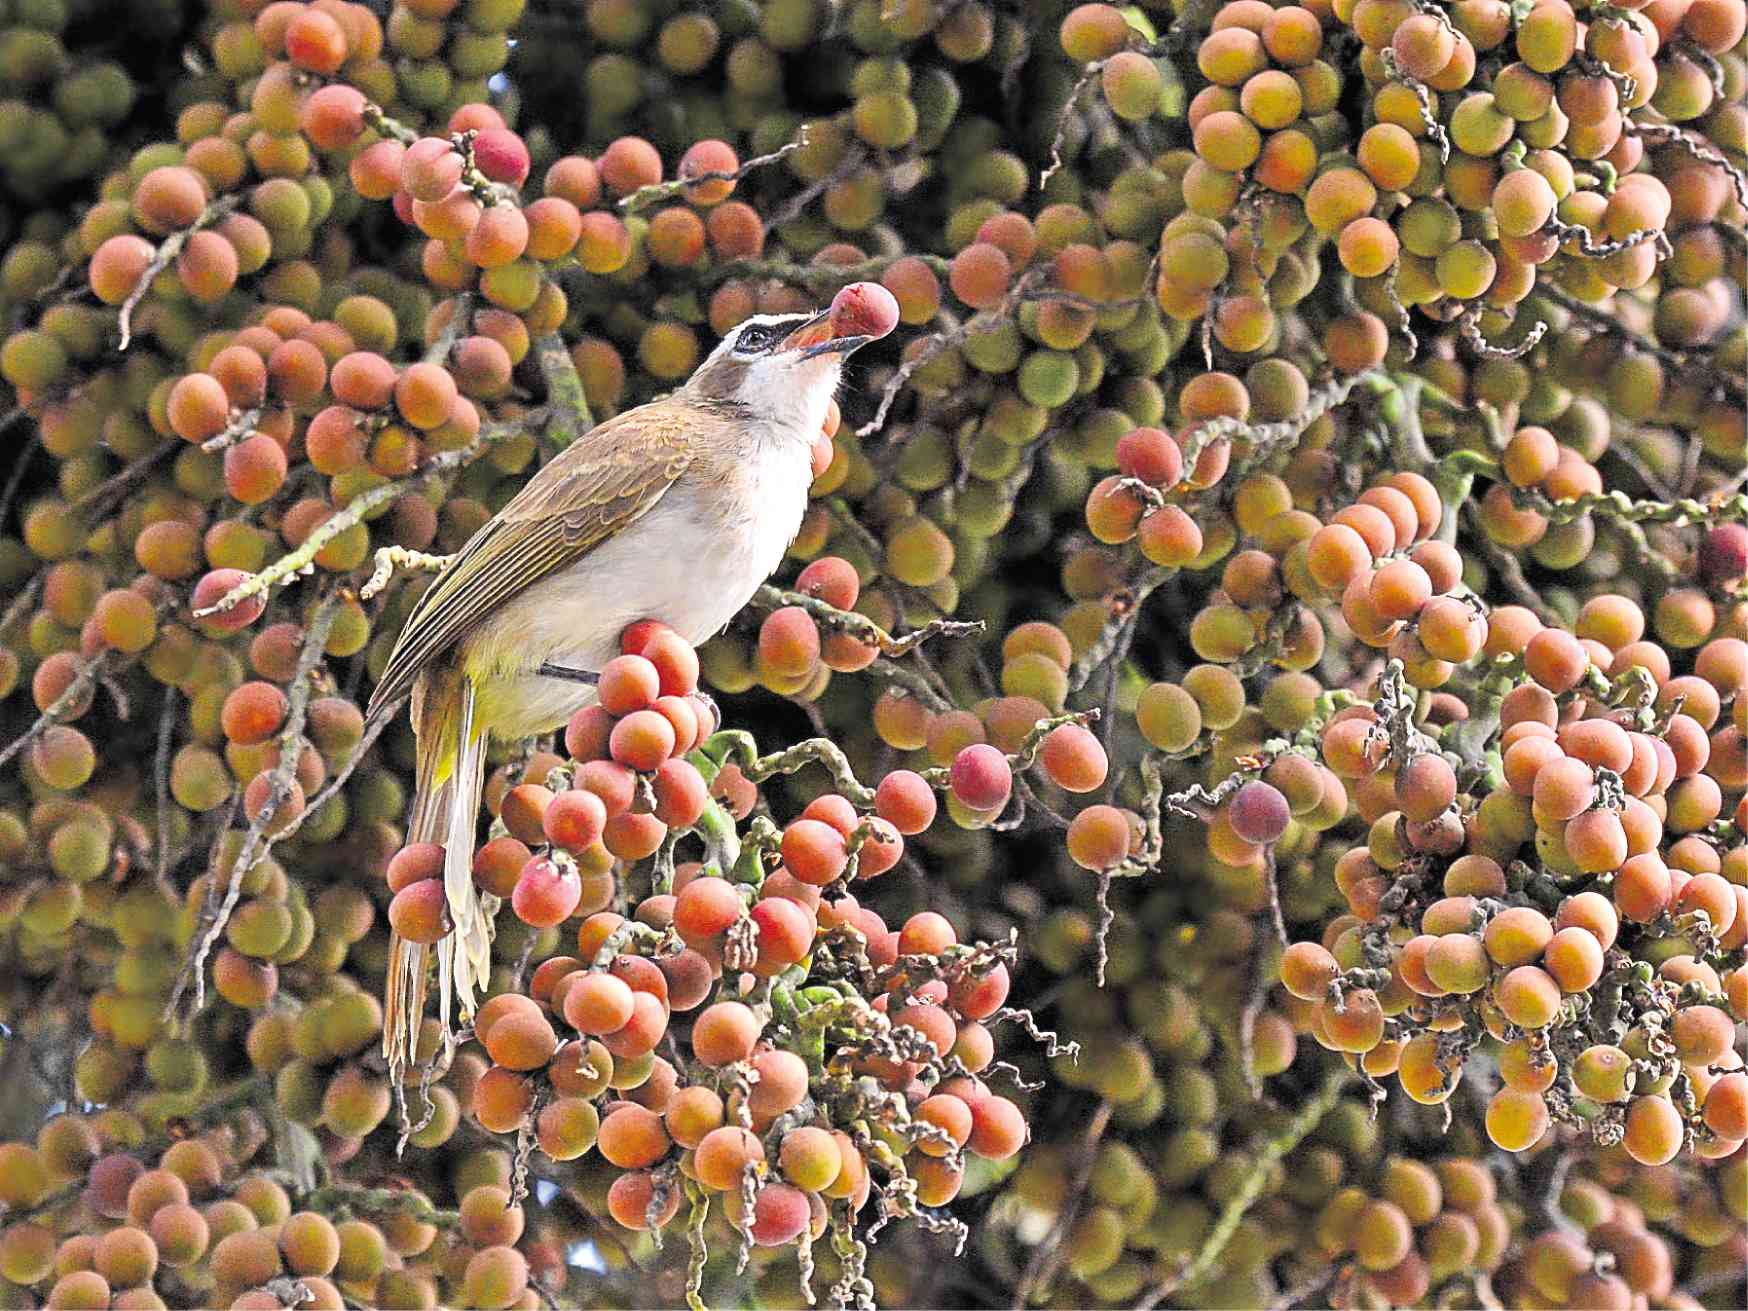 See that ‘pokpok’? The thrills and trills of UP bird-watching